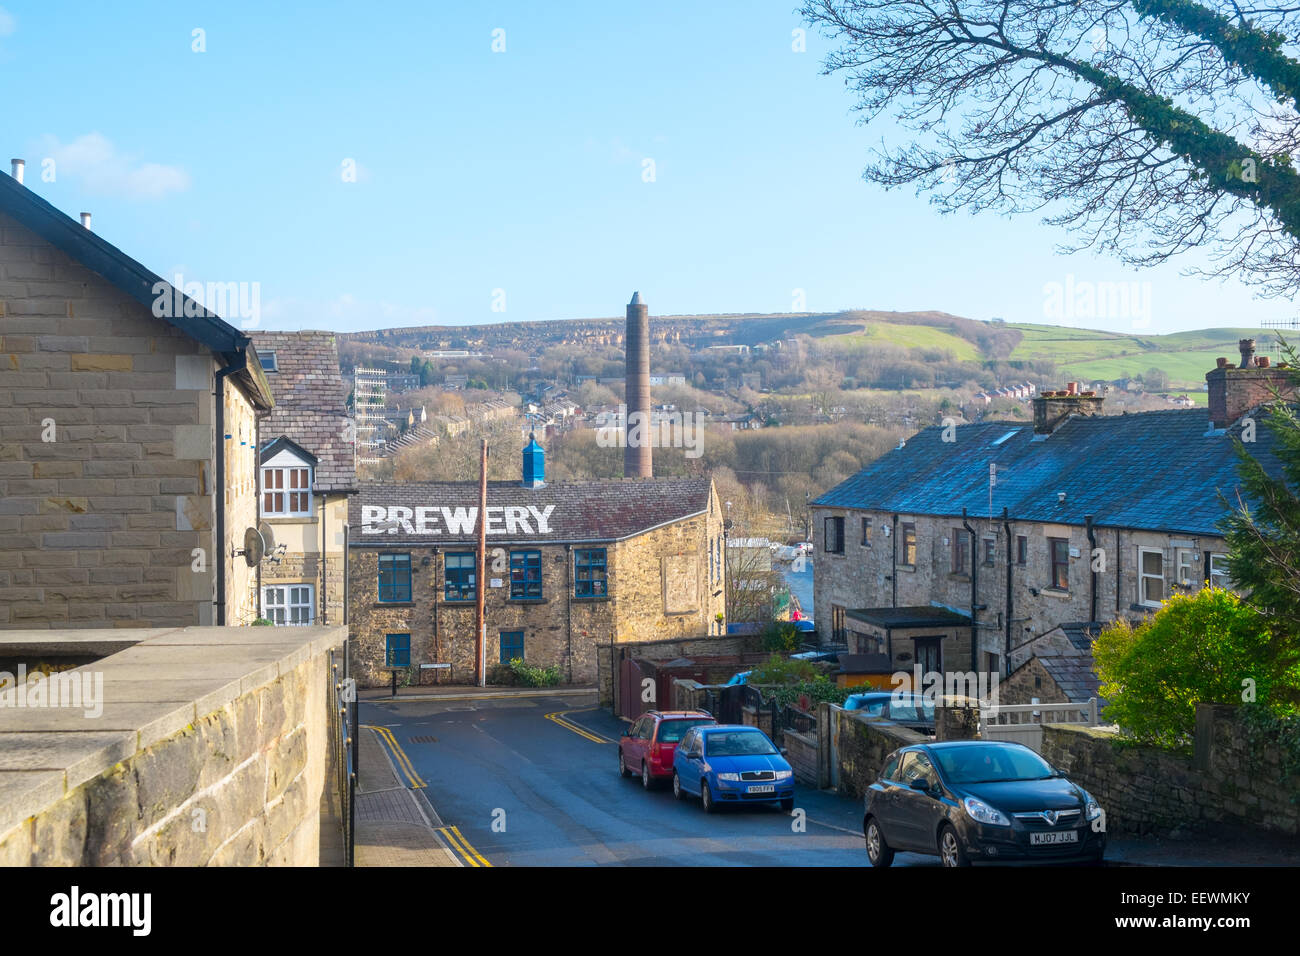 Irwell beer brewery in Ramsbottom, a village in Lancashire,England,Uk Stock Photo